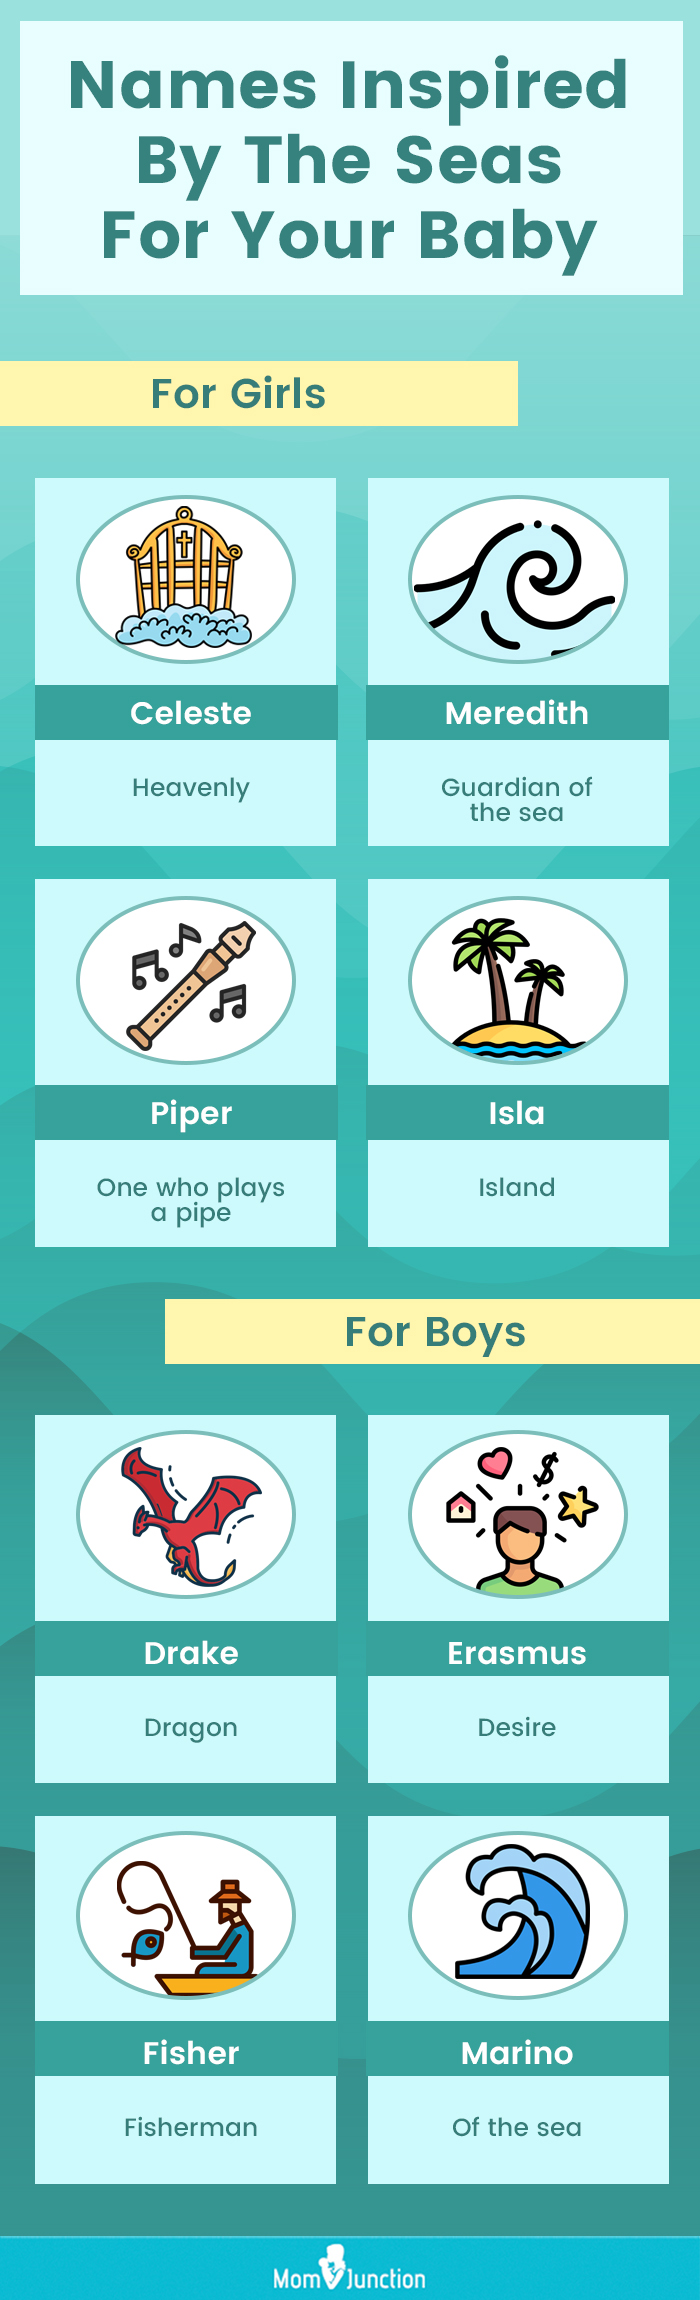 names inspired by the seas for your baby (infographic)